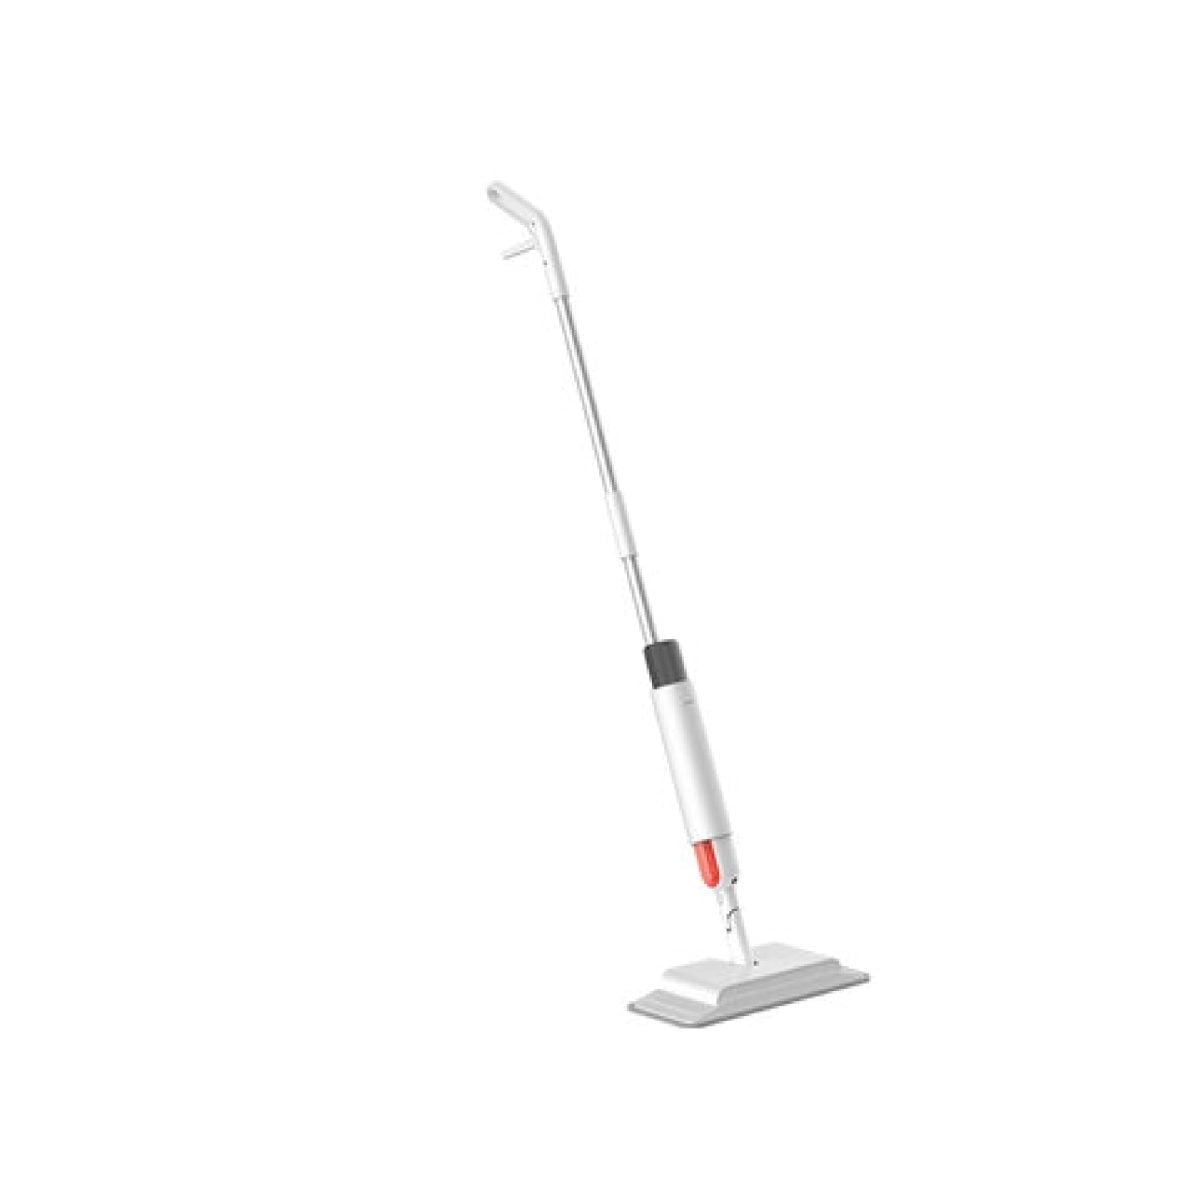 Delmar 07 Xiaomi &Amp;Lt;H1&Amp;Gt;Deerma Dem-Tb900 Sweep Mop With Sweeping / Cleaning Function&Amp;Lt;/H1&Amp;Gt; Easy To Operate, Easy To Push, Long-Distance Spray Can Make The Ground Slightly Damp, High Cleaning Efficiency. Front Roller Brush Spiral Machine, I.e. Pushed Forward Rotation Can Drive The Roller Brush, The Floor Dust Rubbish Swept Into The Dust Box, Dust And No Sweep Net. Soft Bristles Slender, Deep Ground Slit Sweep Out Dust, Clean The Inside And Outside. Deerma Deerma Dem-Tb900 Sweep Mop With Sweeping / Cleaning Function